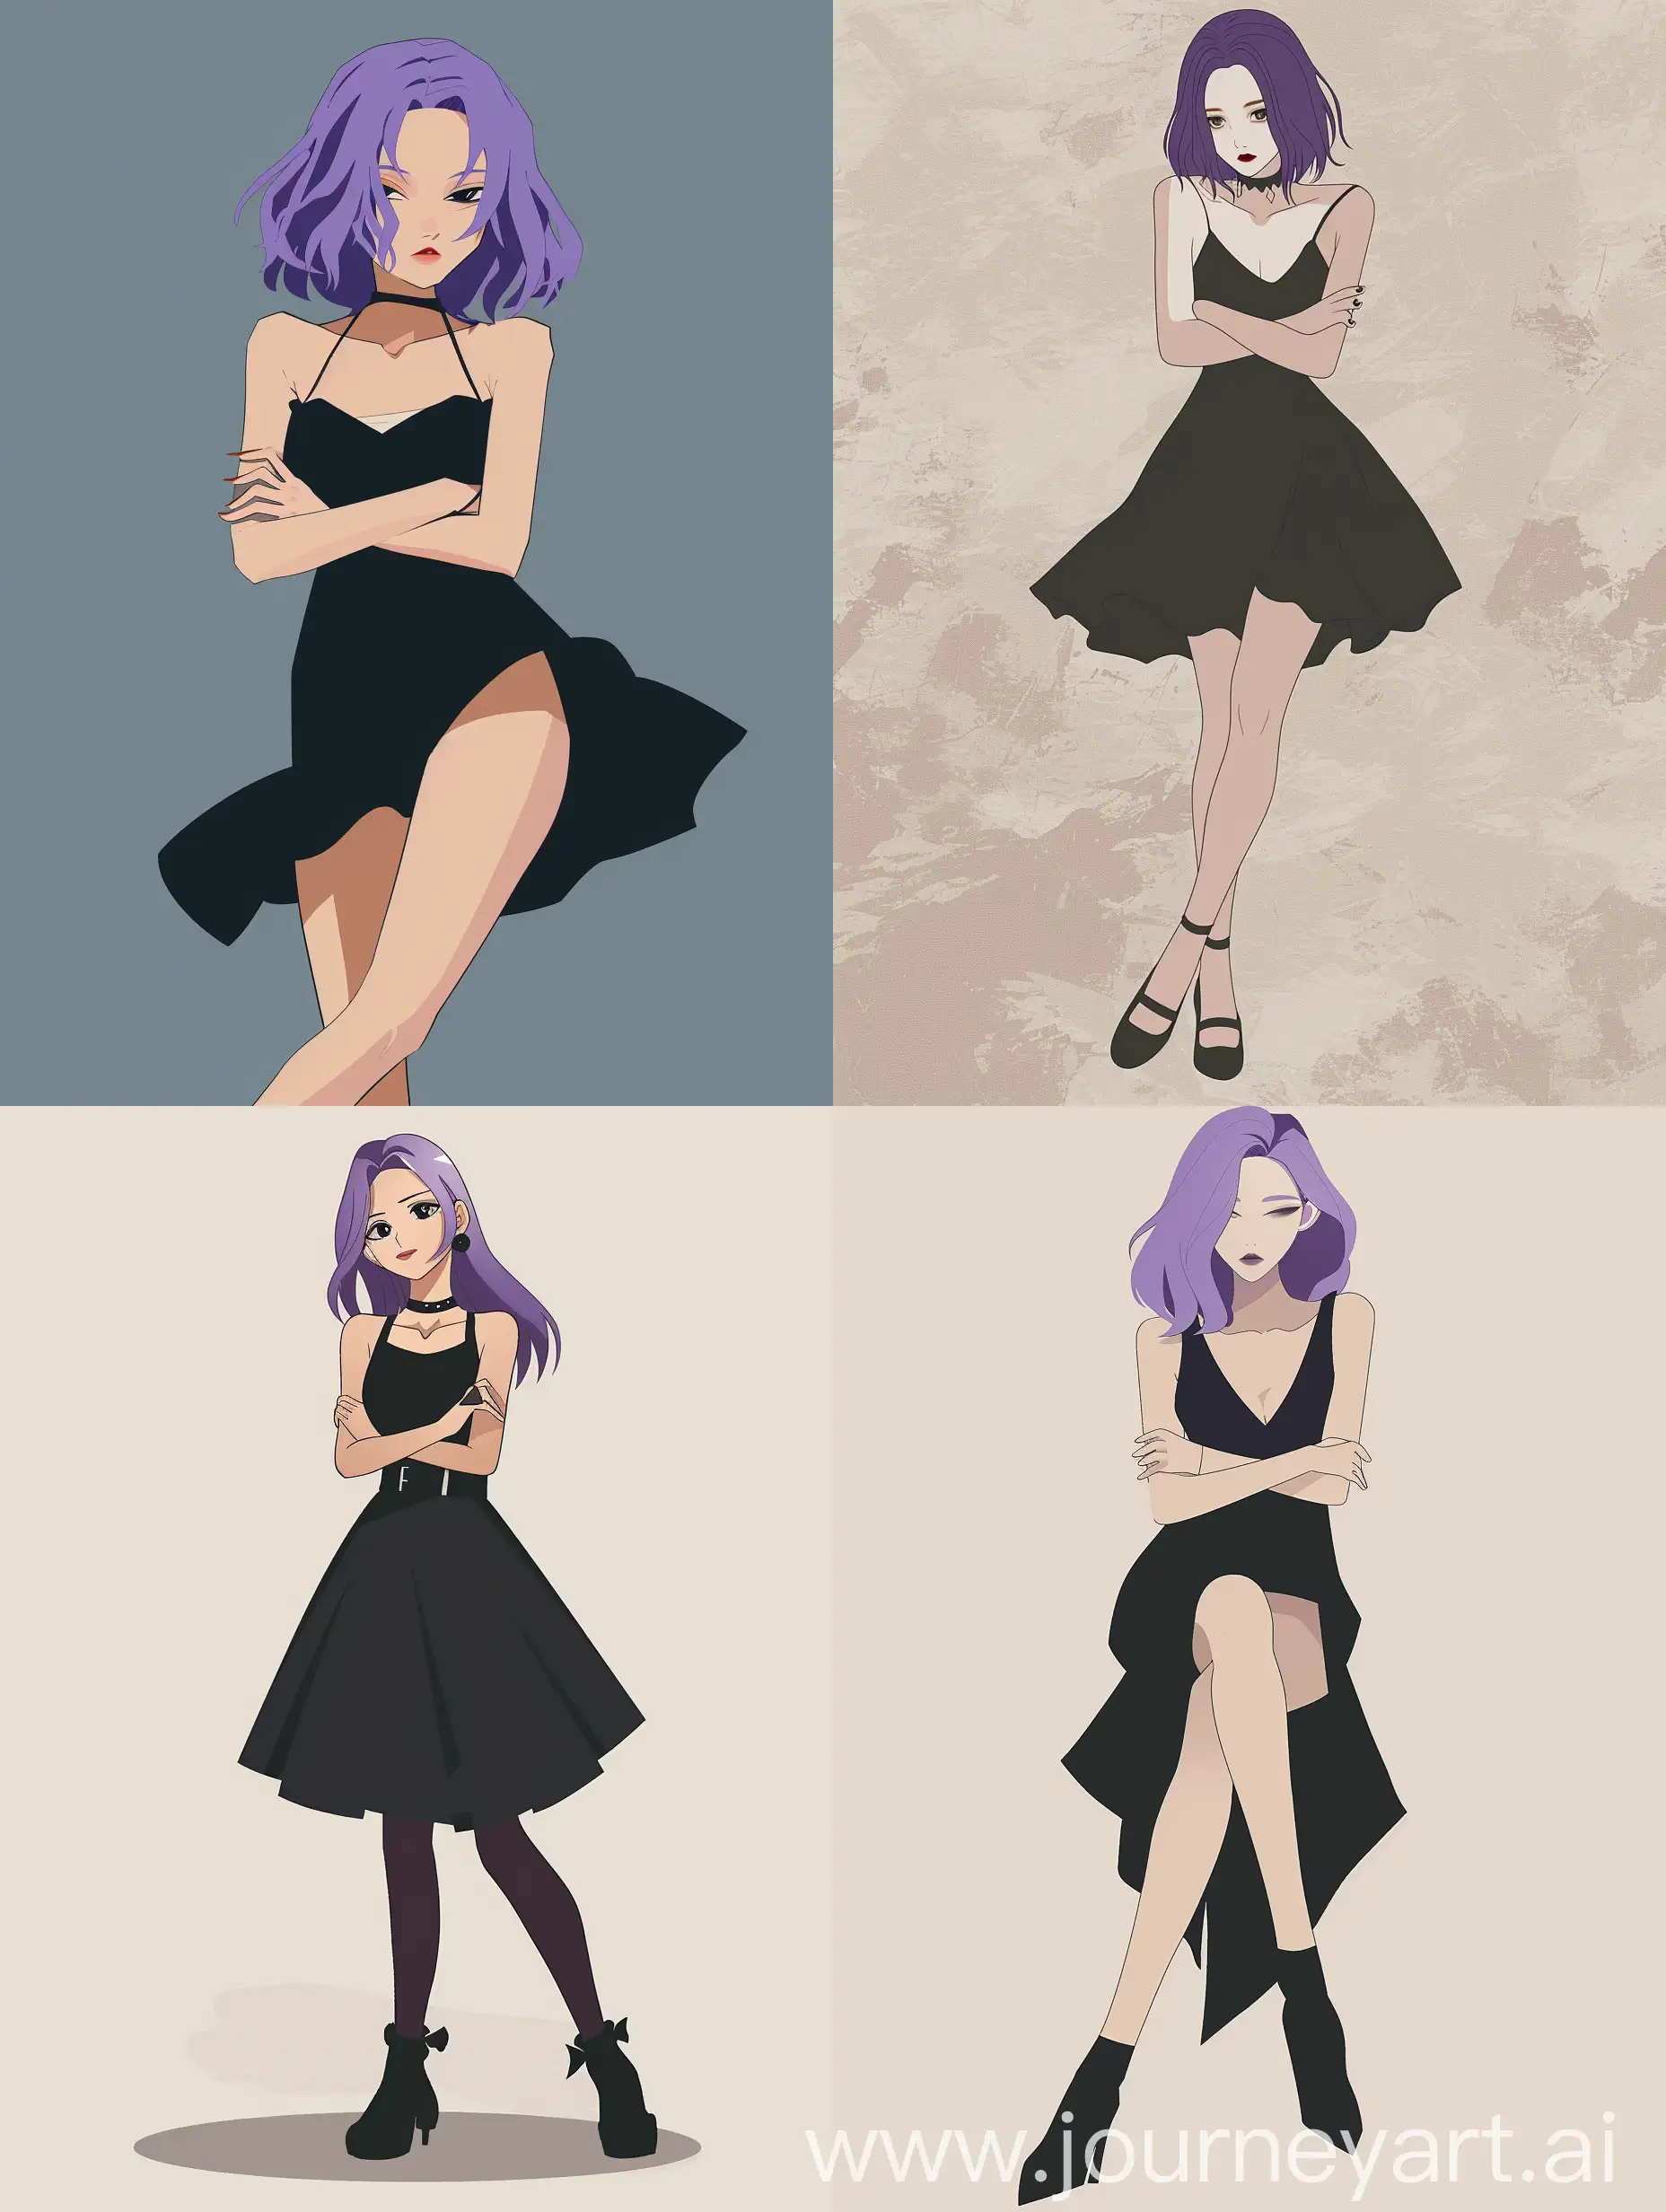 Minimalistic-Gothic-Woman-Portrait-with-Purple-Hair-and-Black-Dress